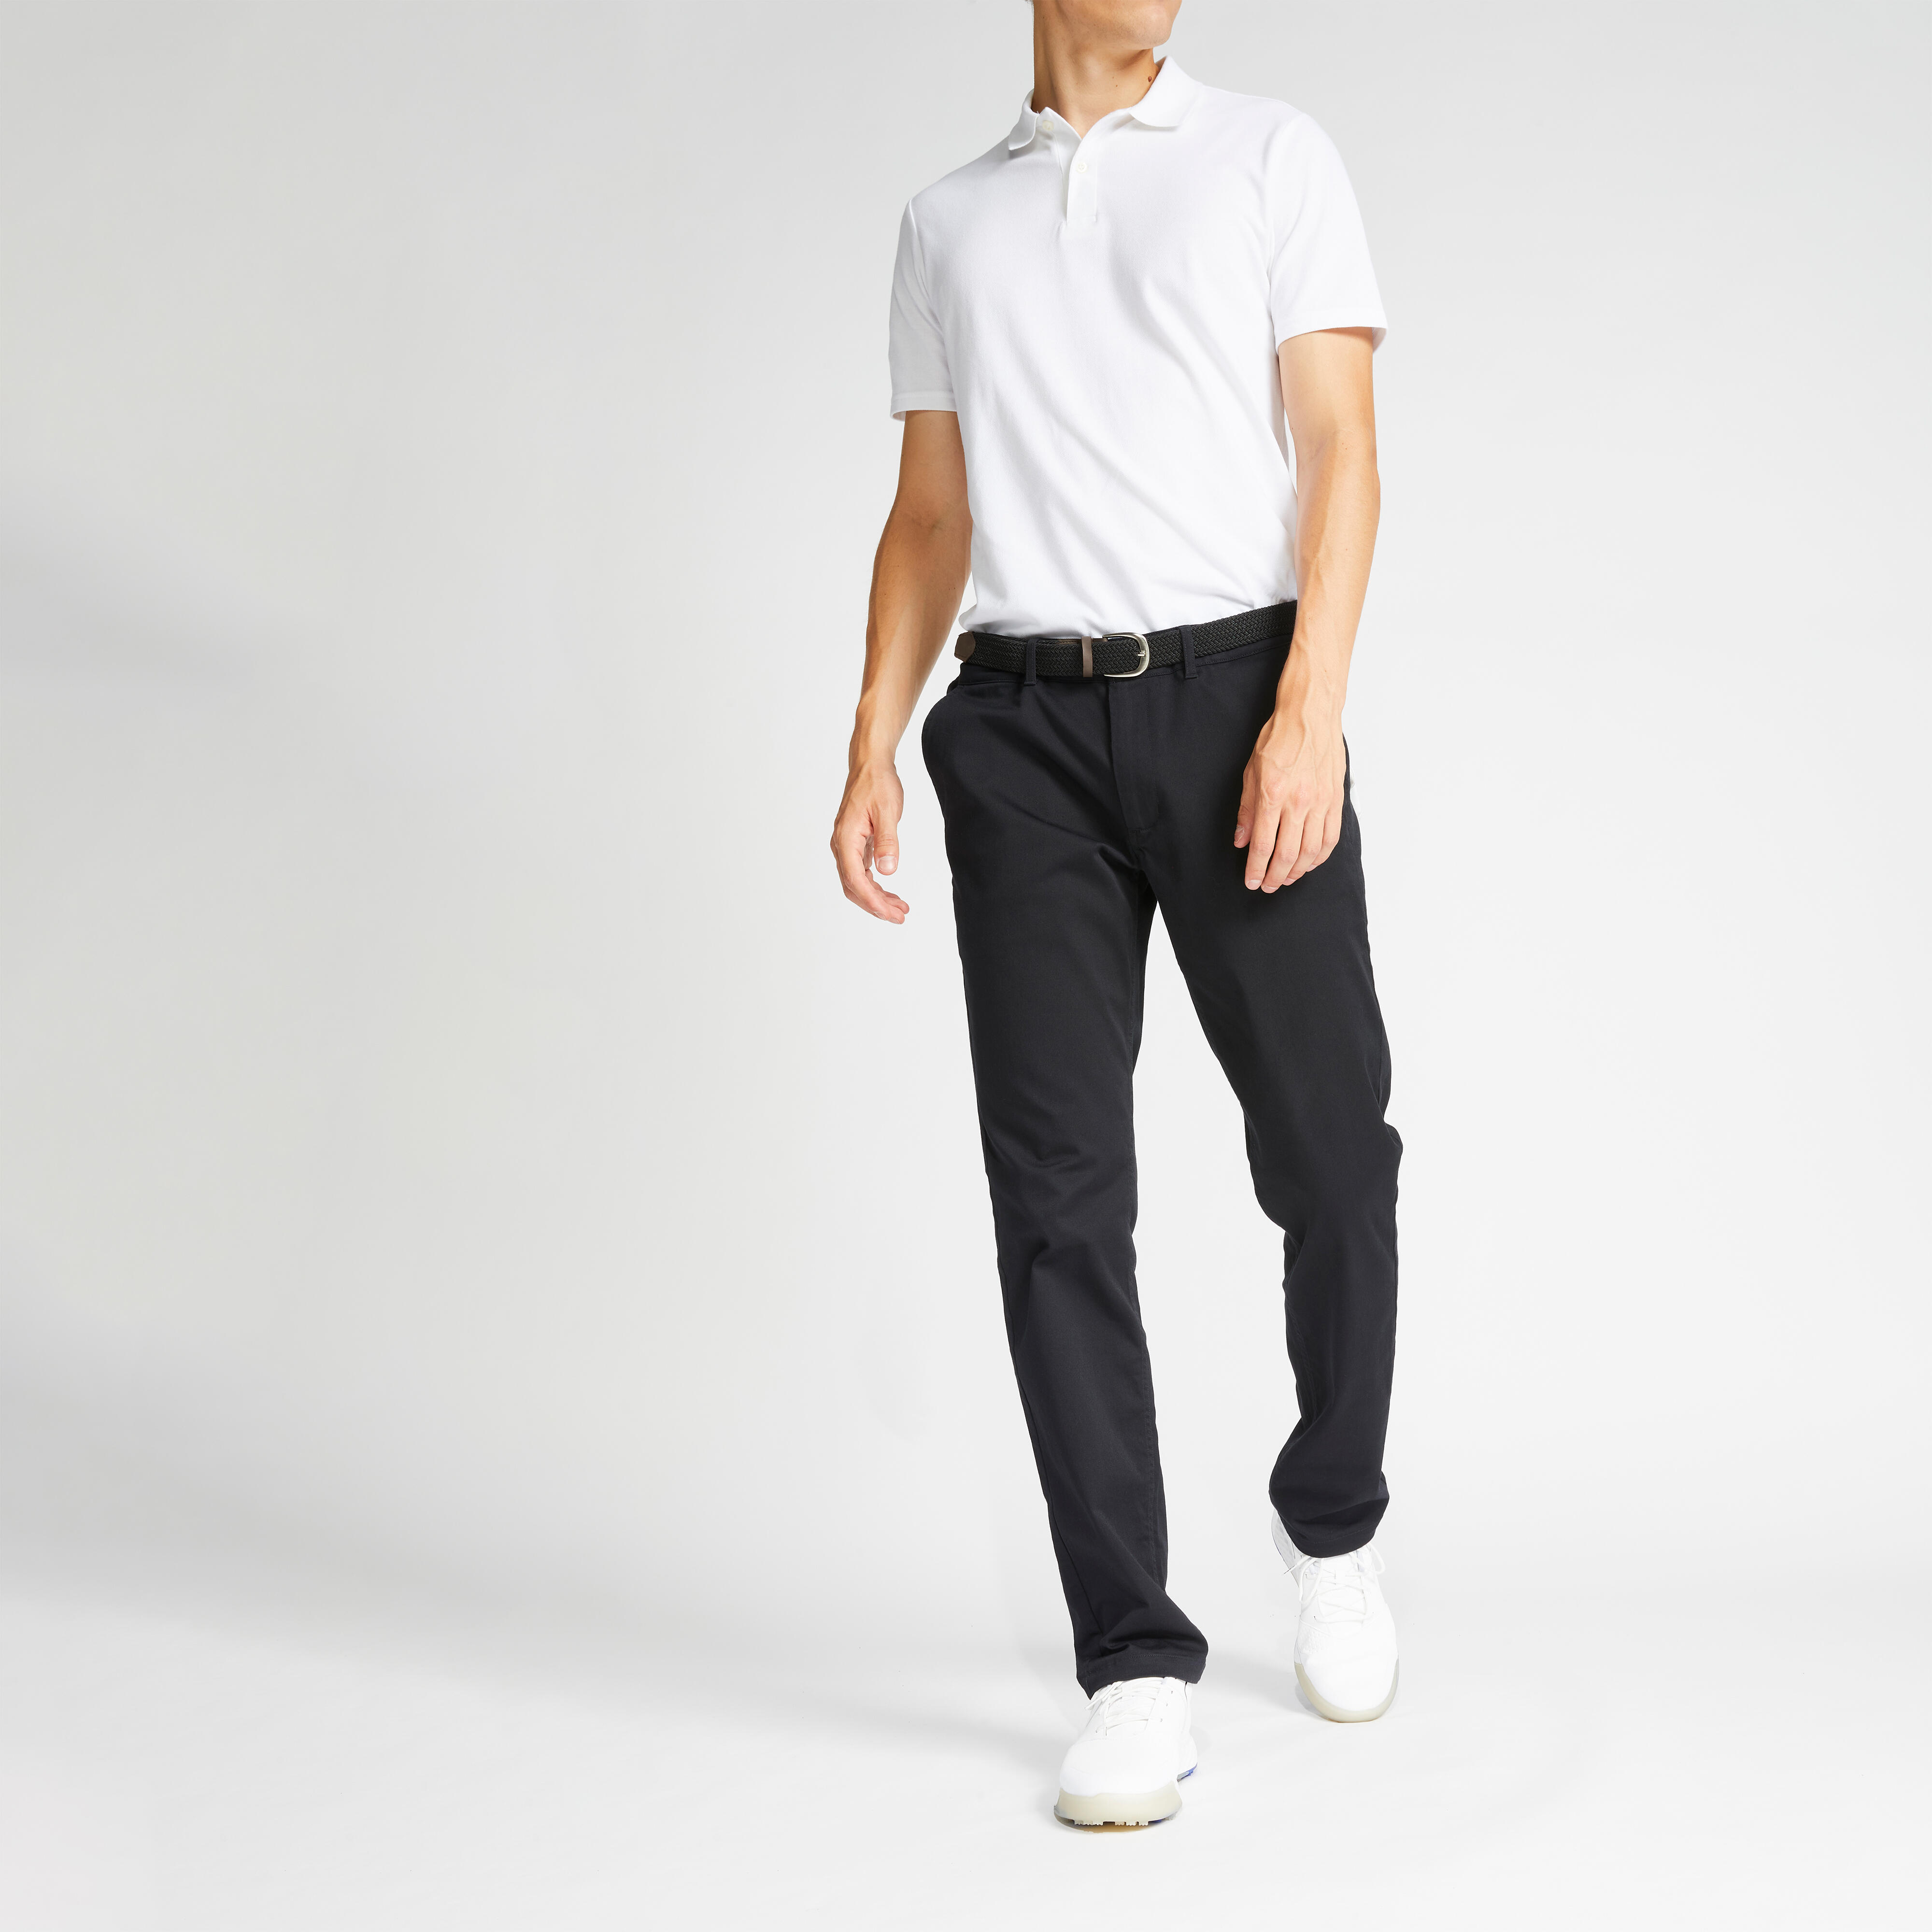 JLindeberg Vent Golf Pant Chino Pants in navy buy online  Golf House